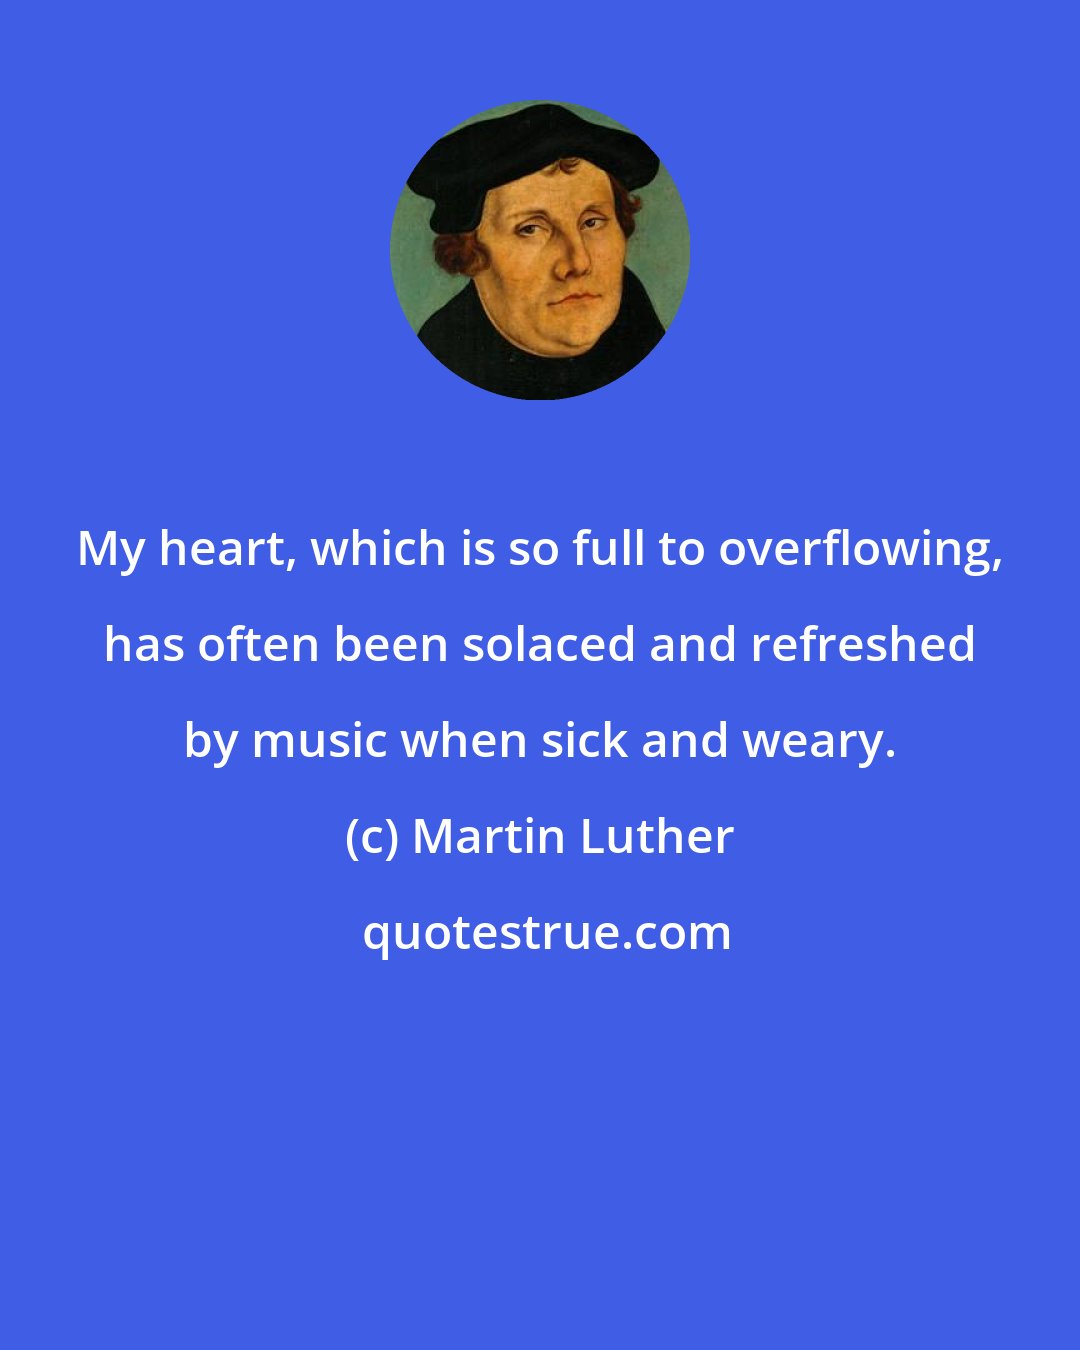 Martin Luther: My heart, which is so full to overflowing, has often been solaced and refreshed by music when sick and weary.